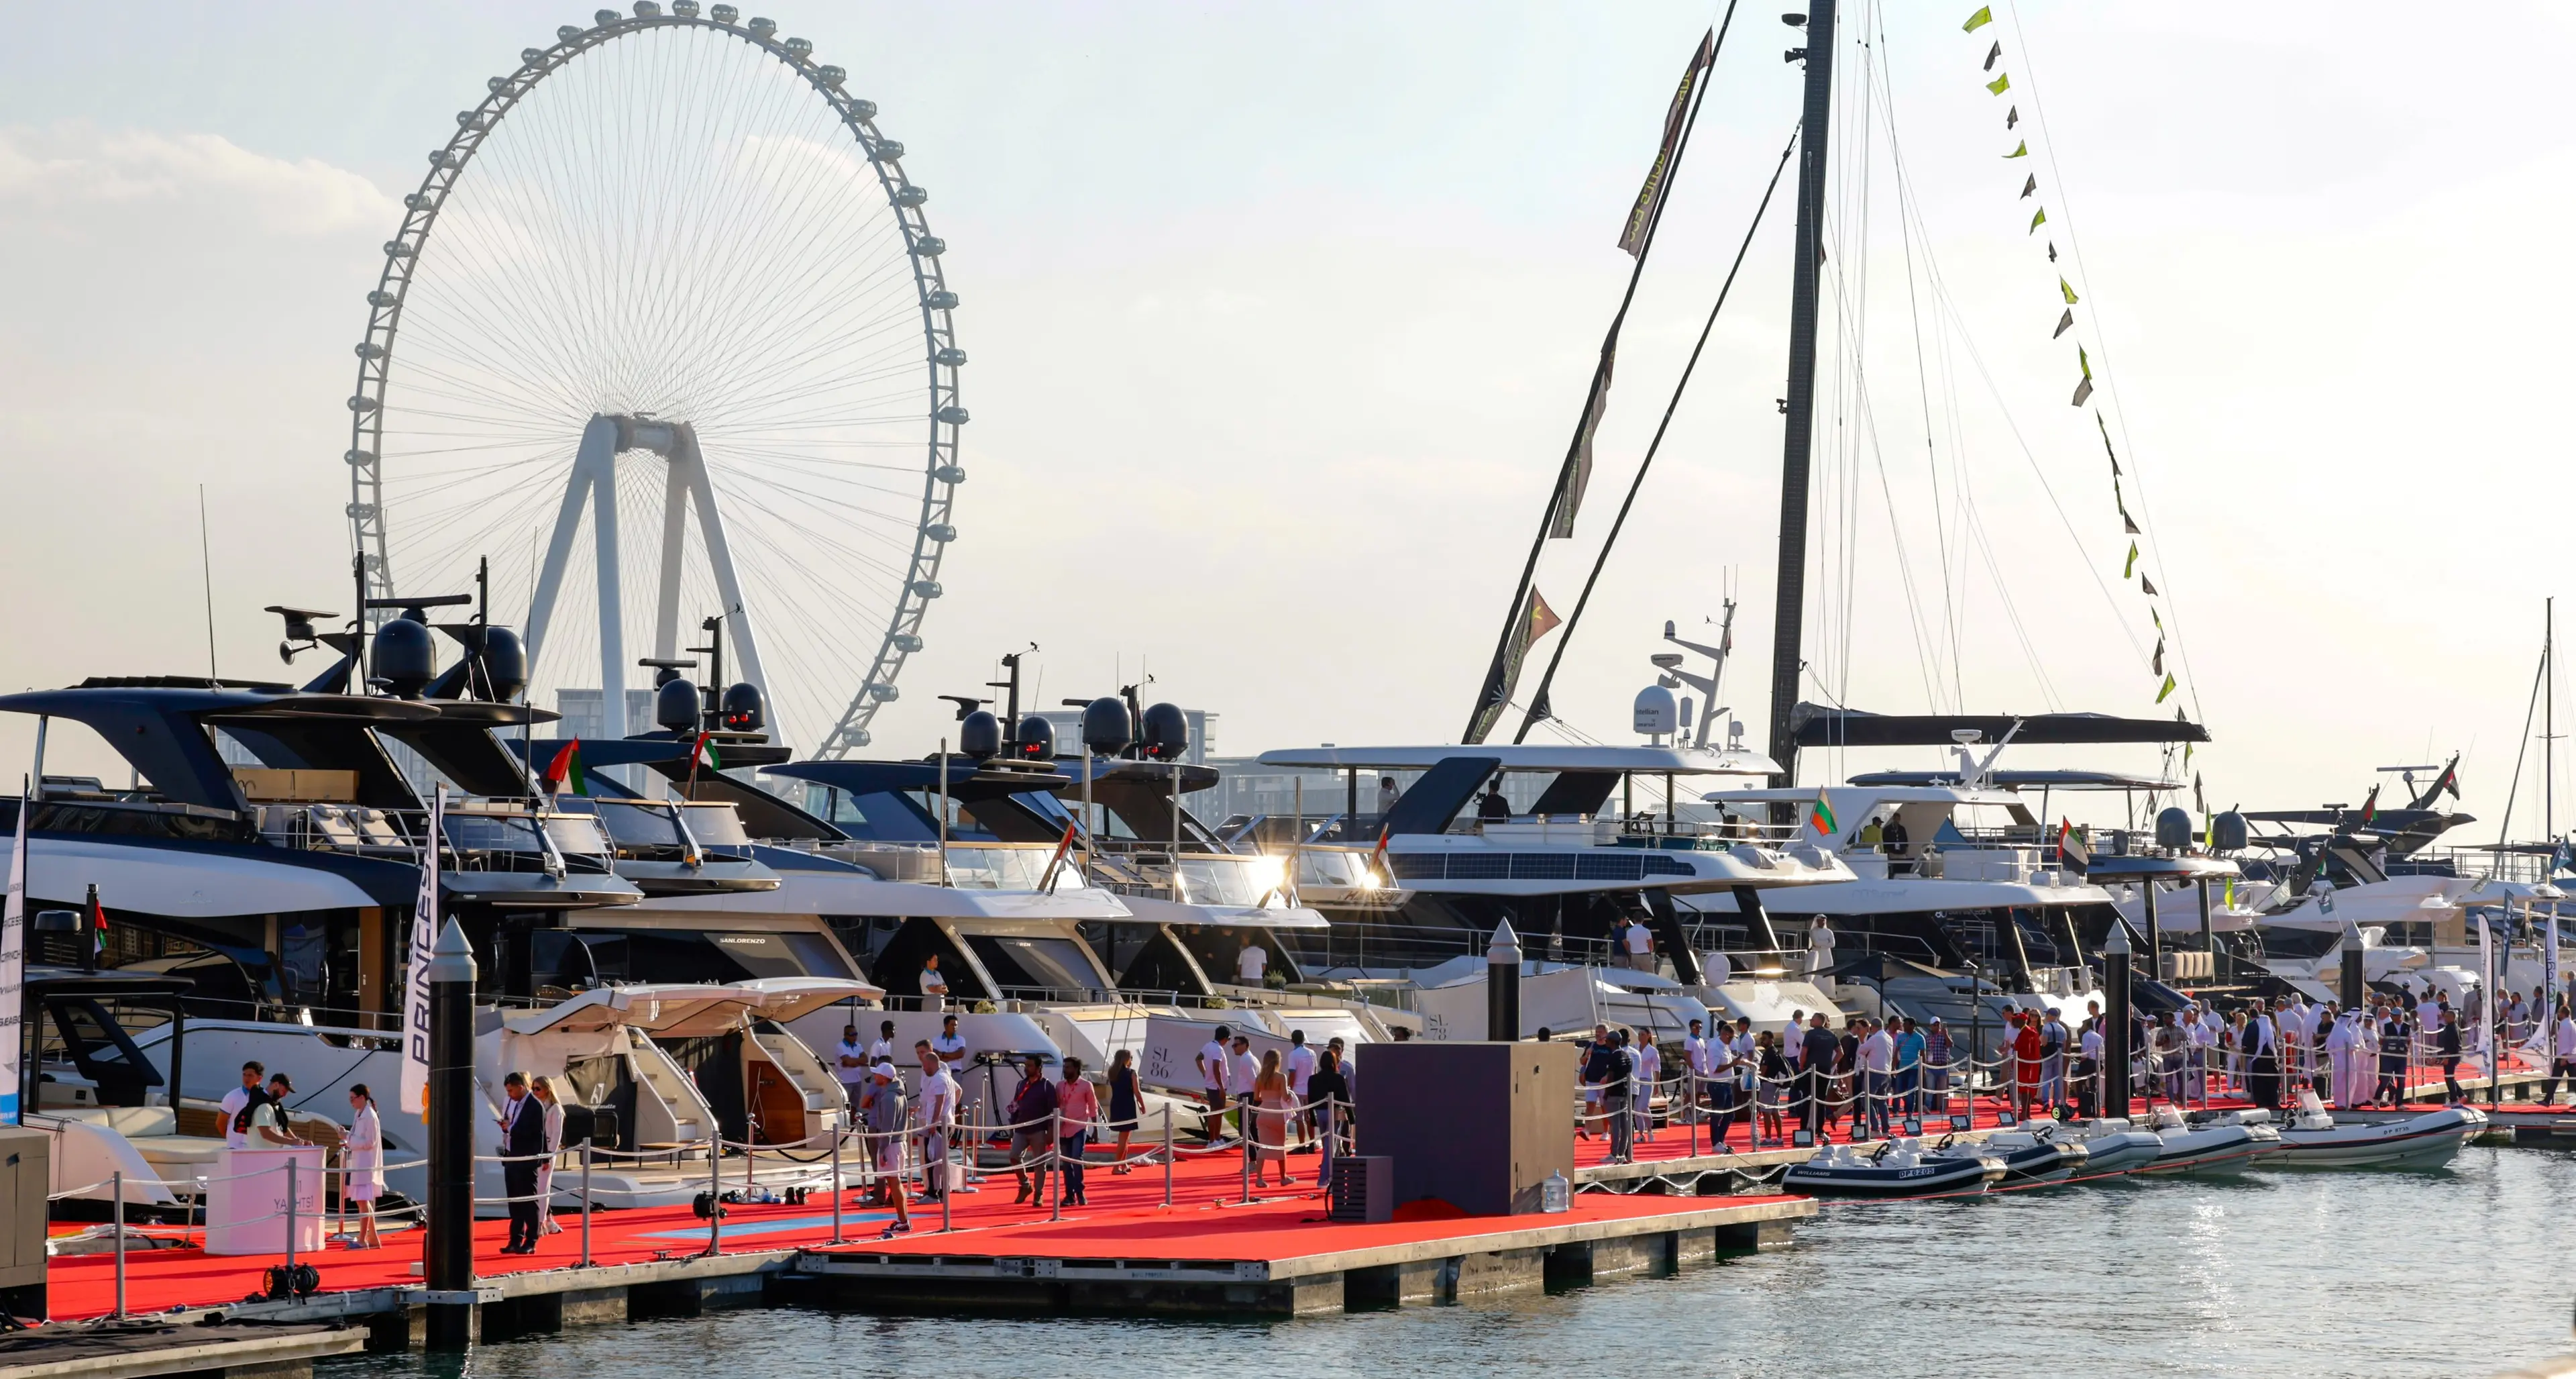 Dubai Boat Show: What's steering the demand for superyachts?